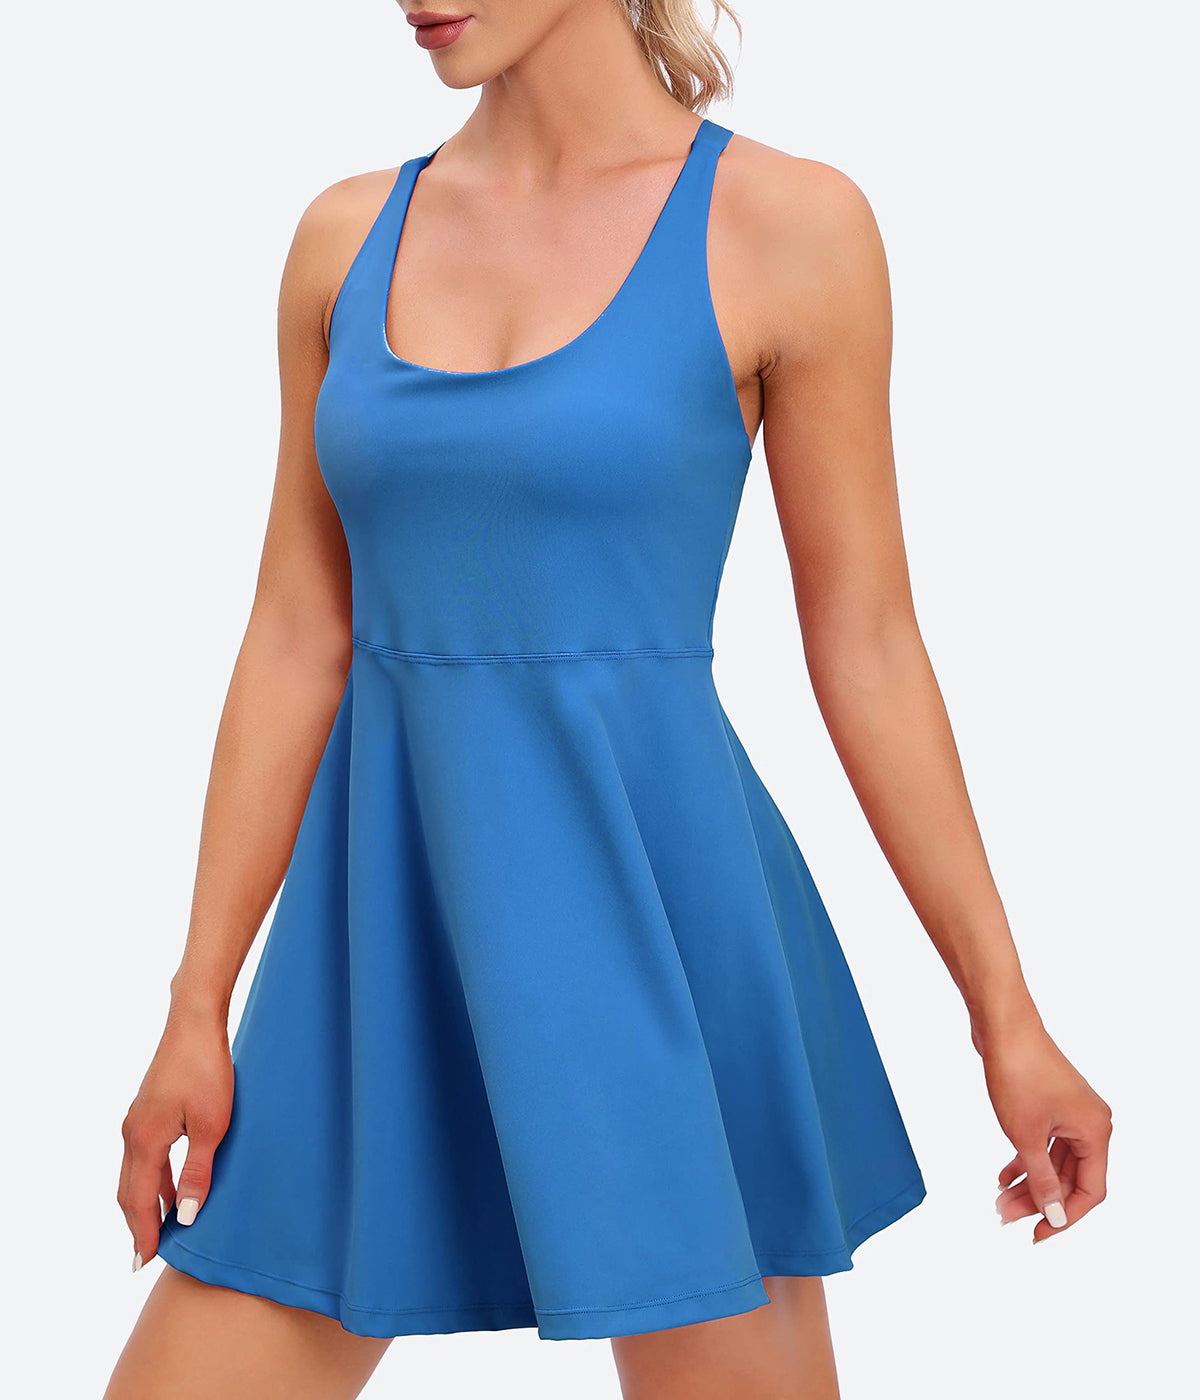 Heathyoga Womens Tennis Dress with Shorts Underneath Workout Dress